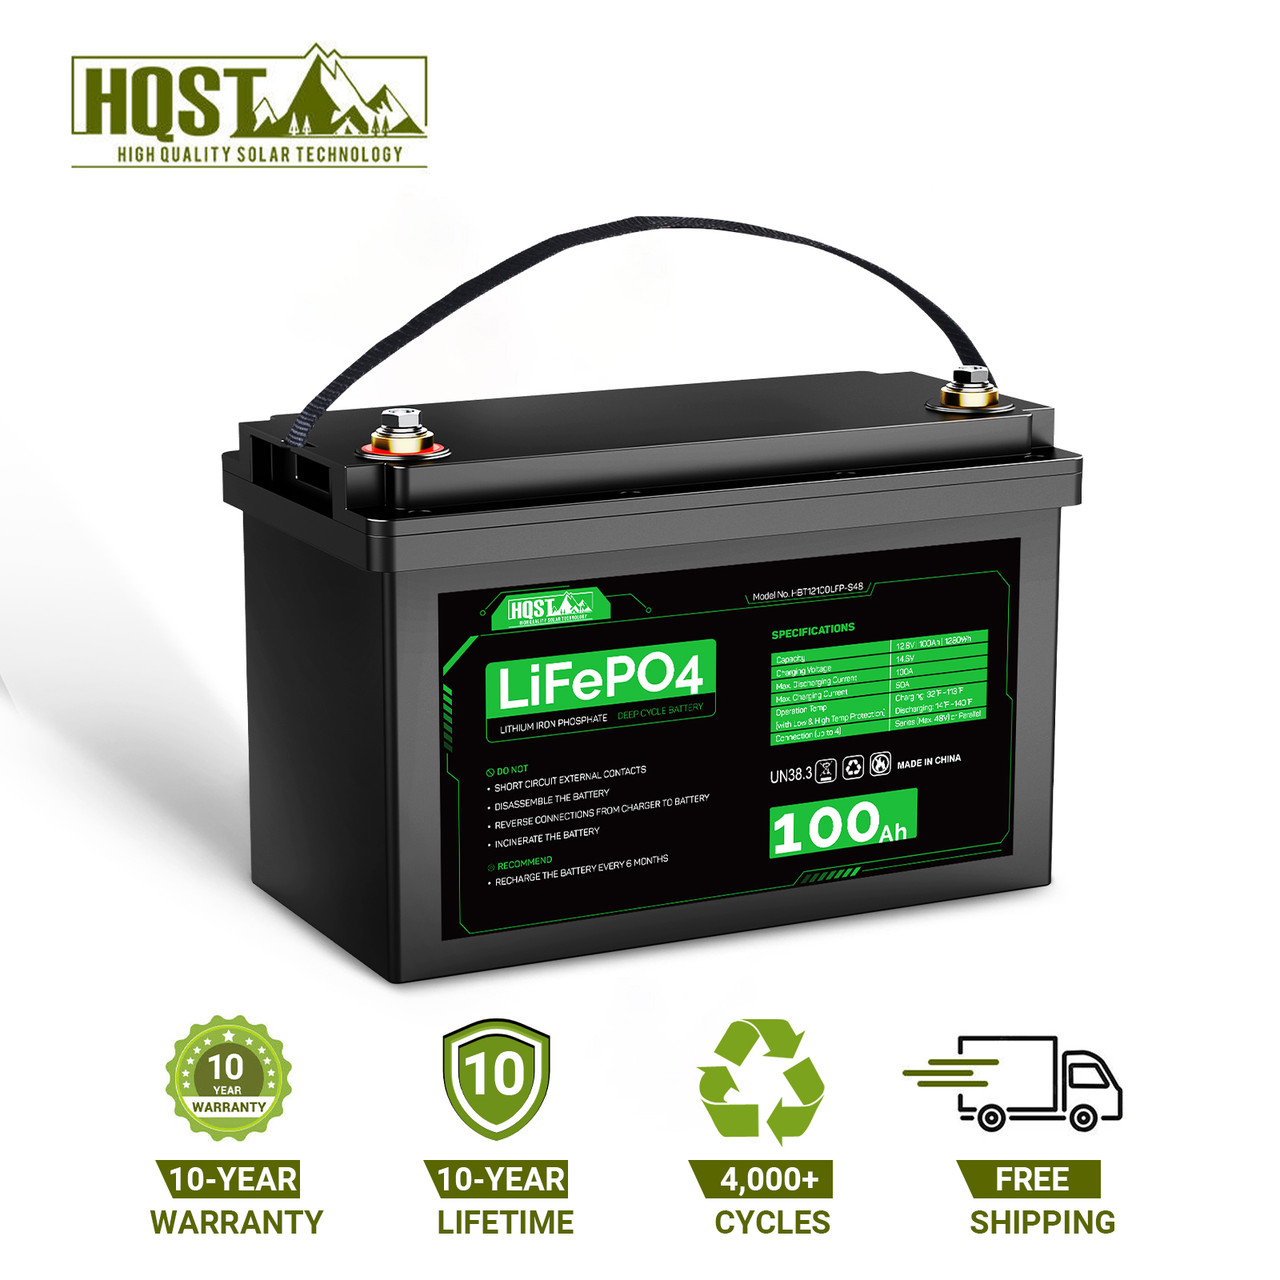  Lithium ion Battery 12V 400Ah LiFePO4 Lithium Iron Battery  Built-in BMS for Replacing Most of Backup Power Home Energy Storage +  Charger : Automotive